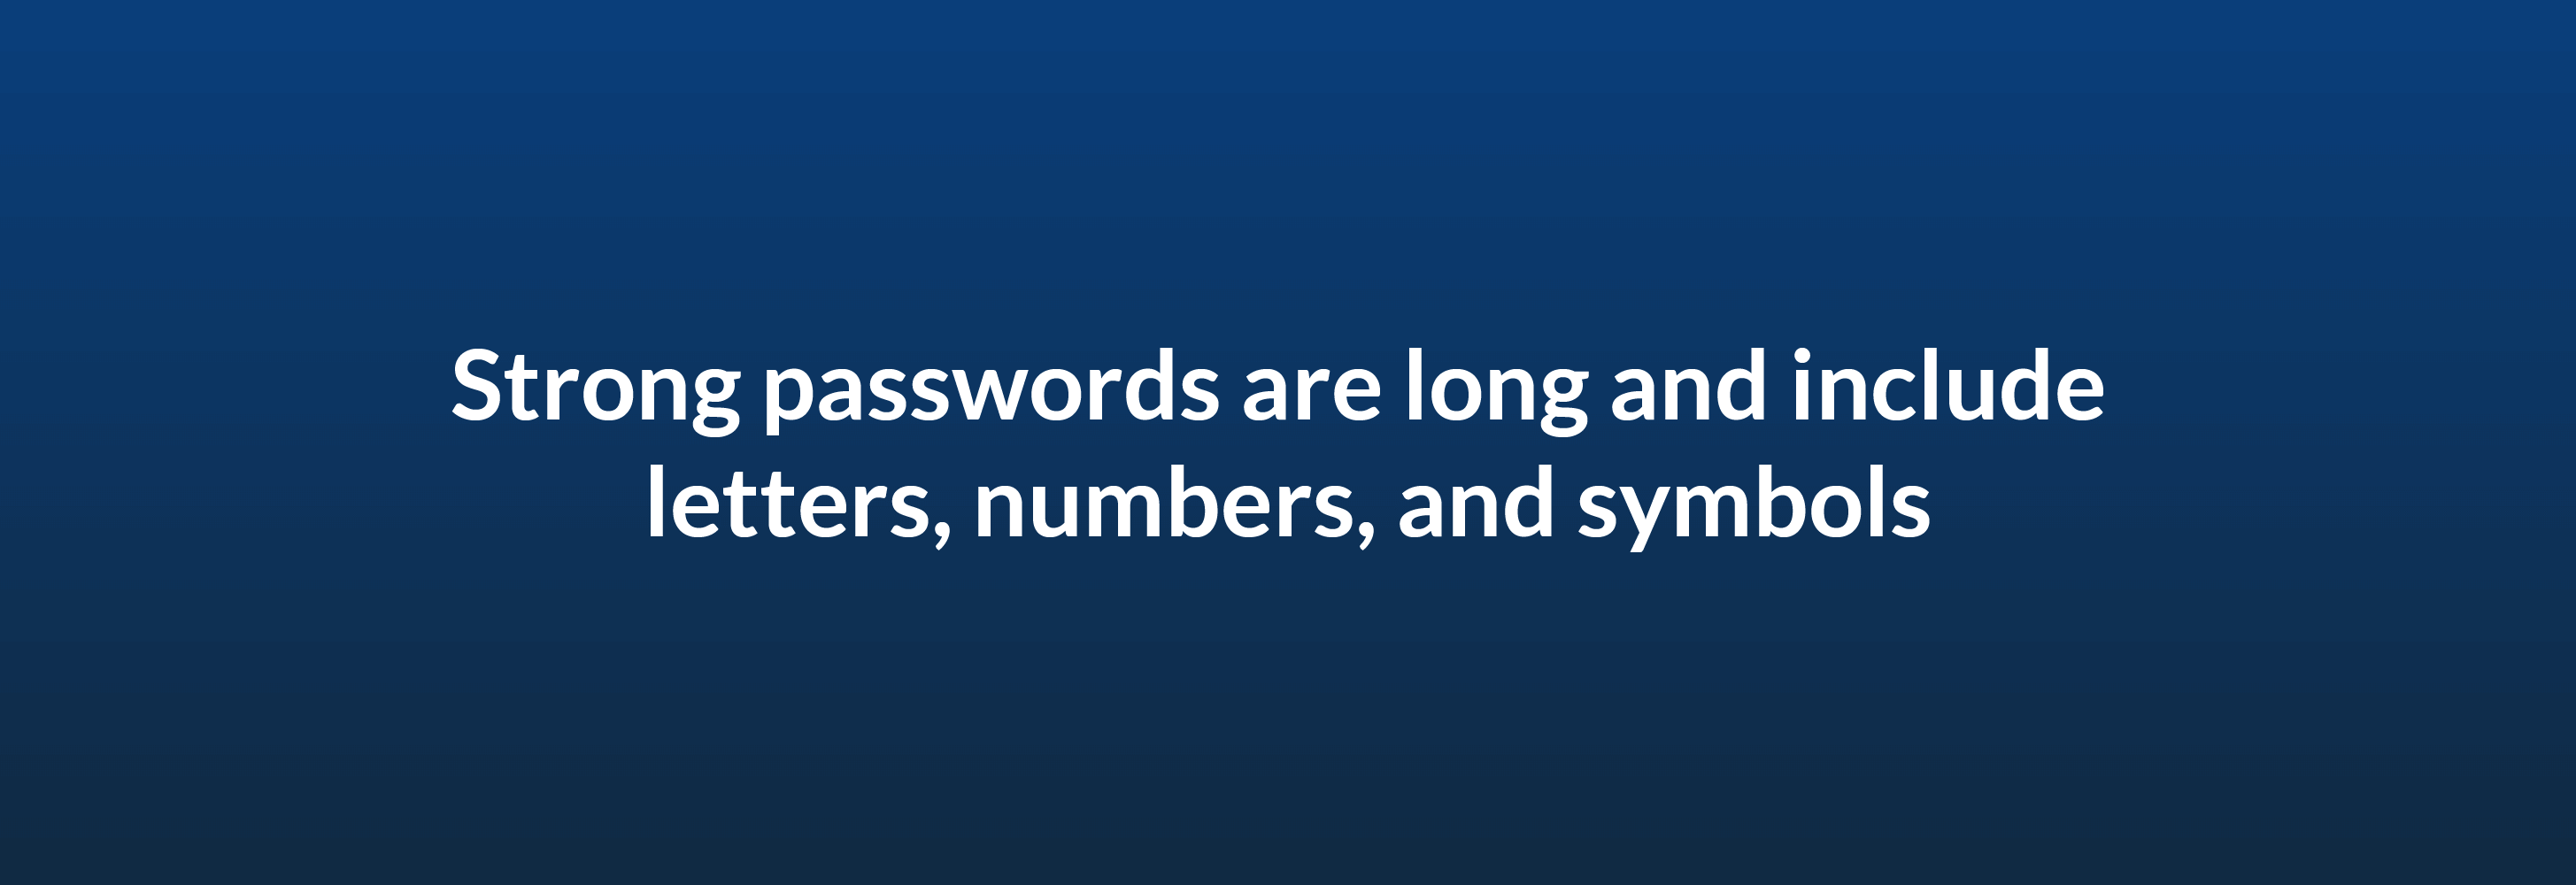 Strong passwords are long and include letters, numbers, and symbols